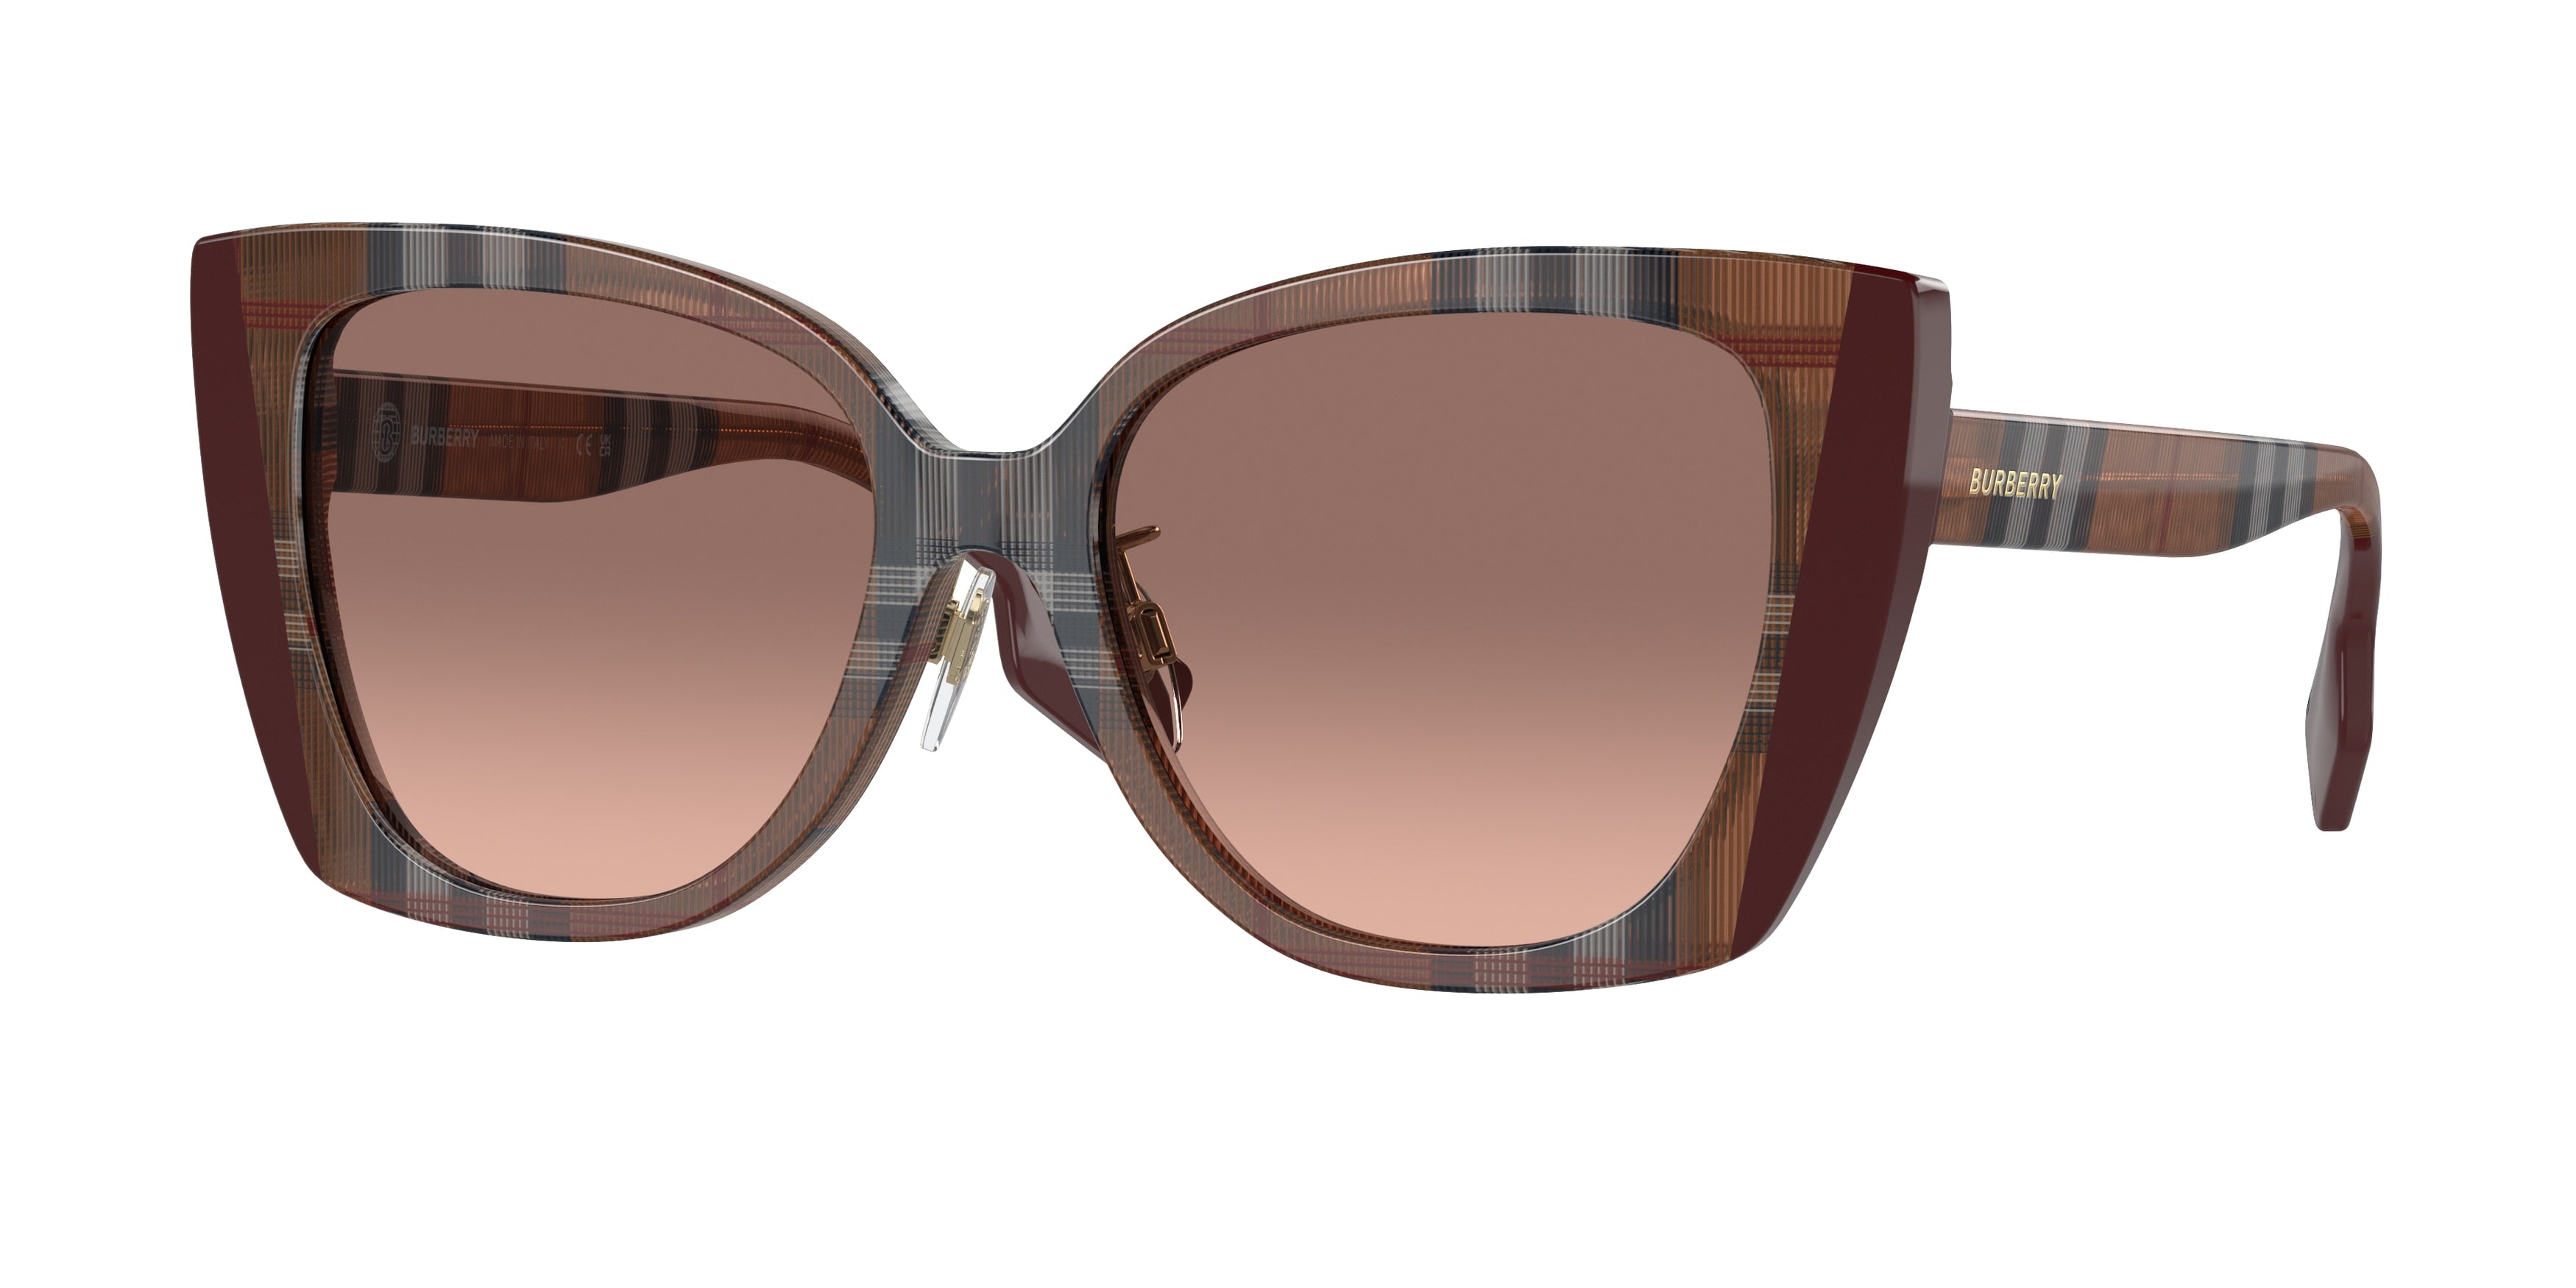 Burberry MERYL BE4393F Cat Eye Sunglasses  405413-Check Brown/Bordeaux 54-140-17 - Color Map Brown